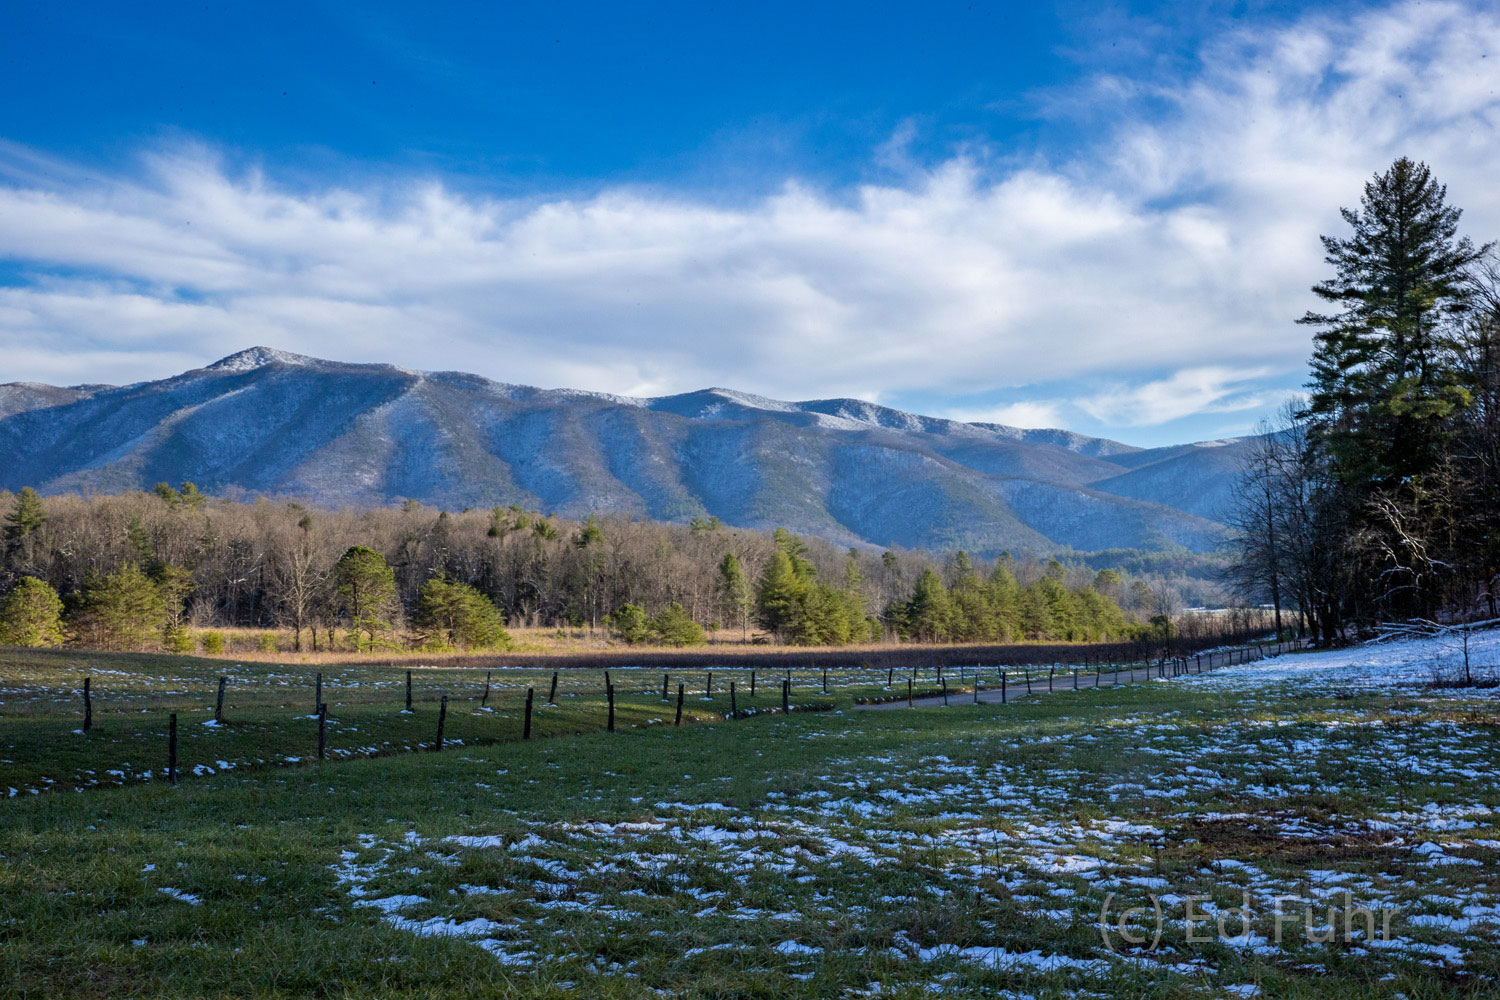 Traces of snow remain in Cades Cove.